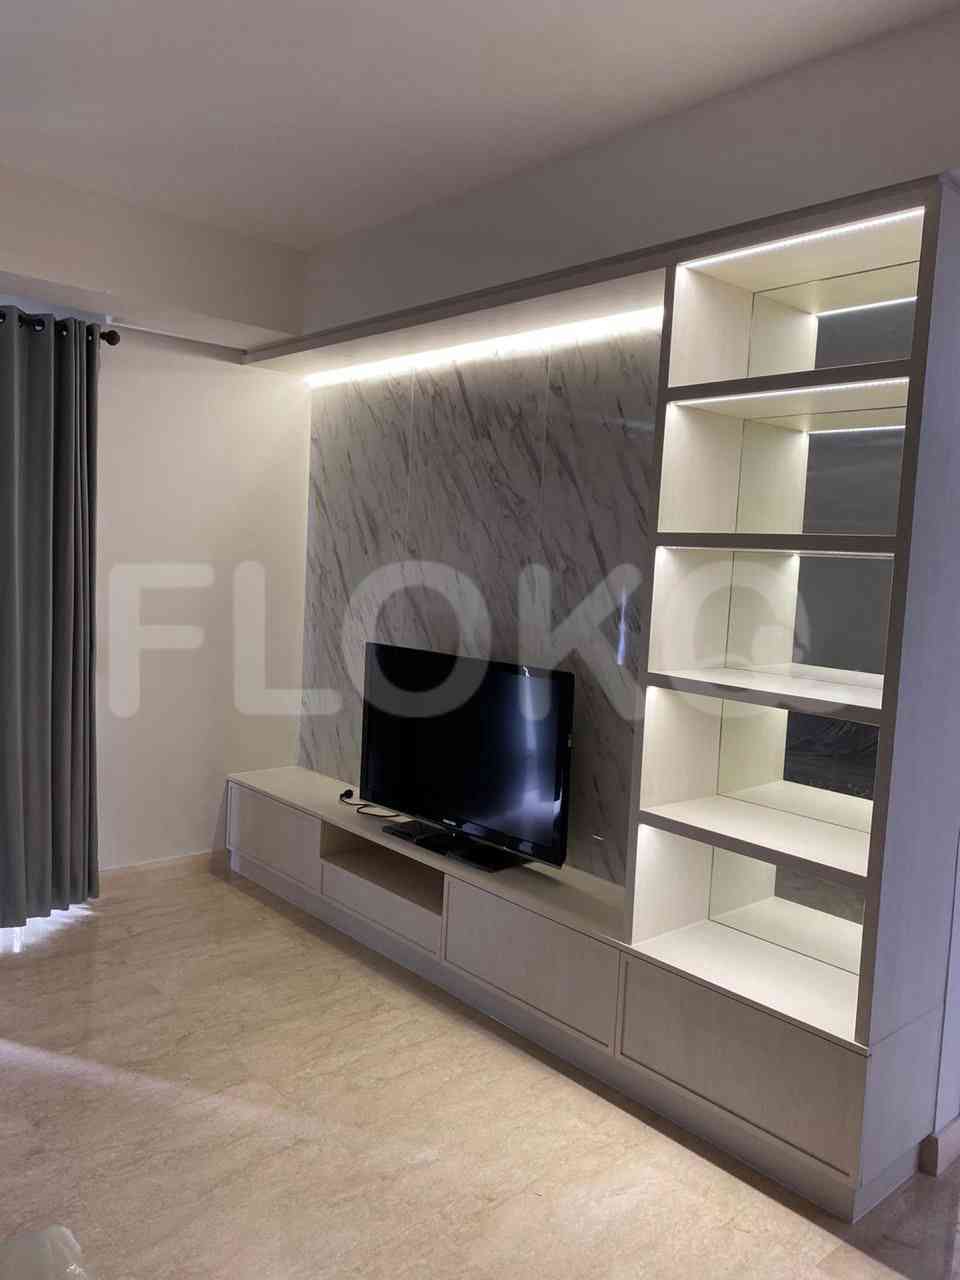 3 Bedroom on 28th Floor for Rent in Gold Coast Apartment - fkaee8 6